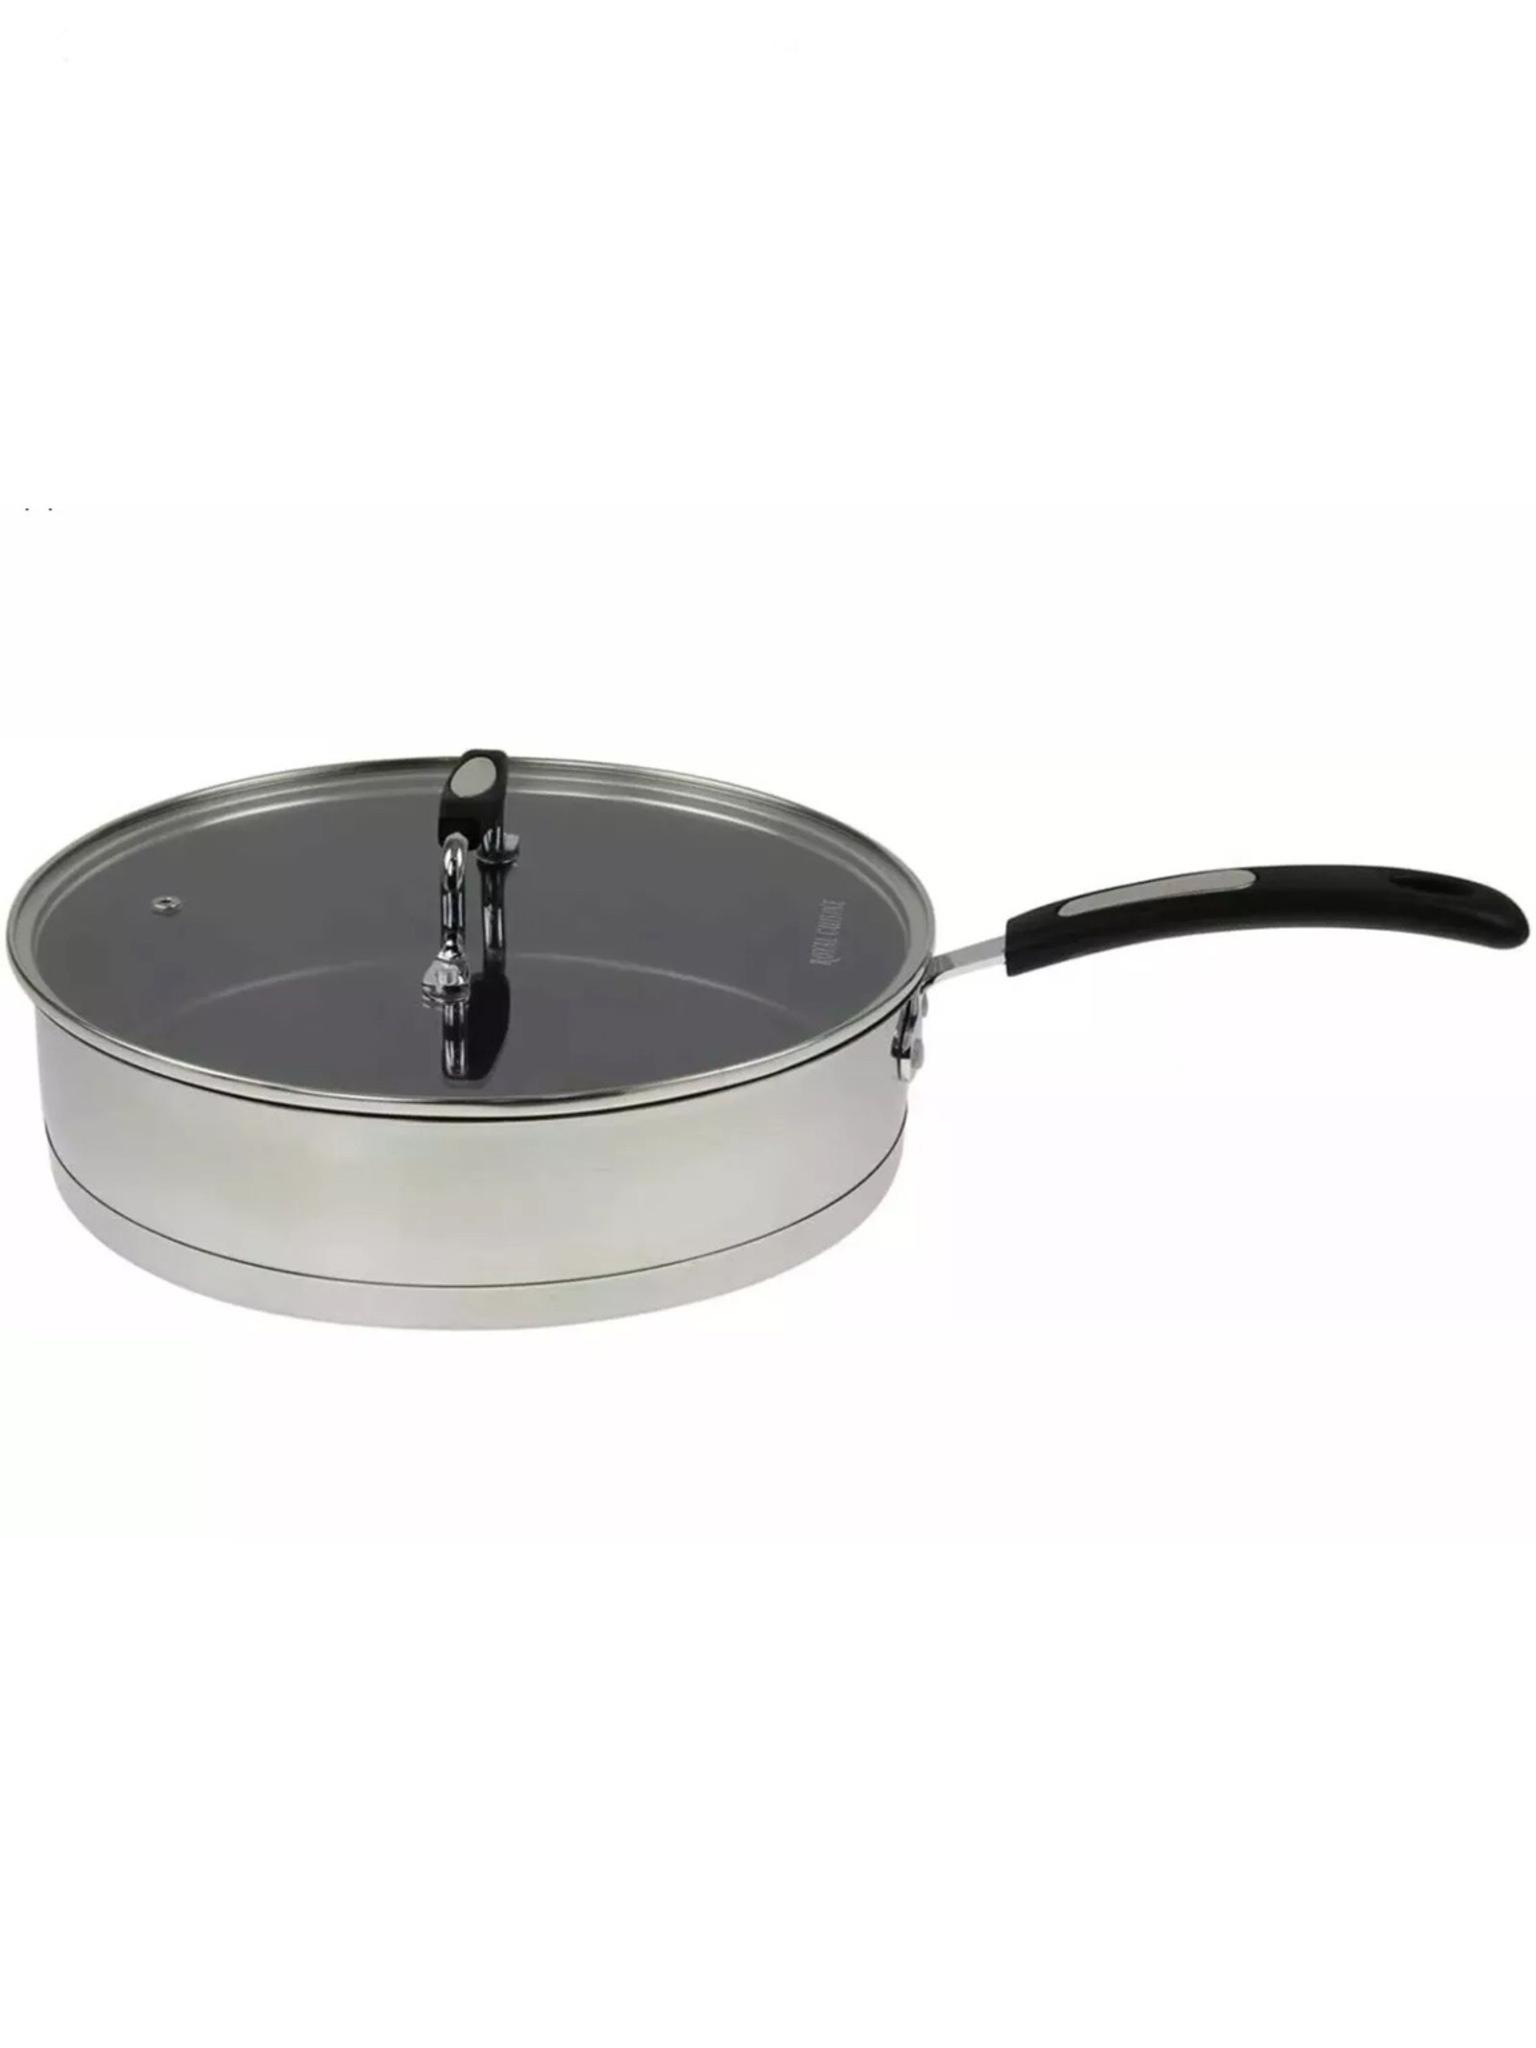 Royal Cuisine  Stainless Steel Saute Frying Pan Non Stick & Glass Lid Cover 